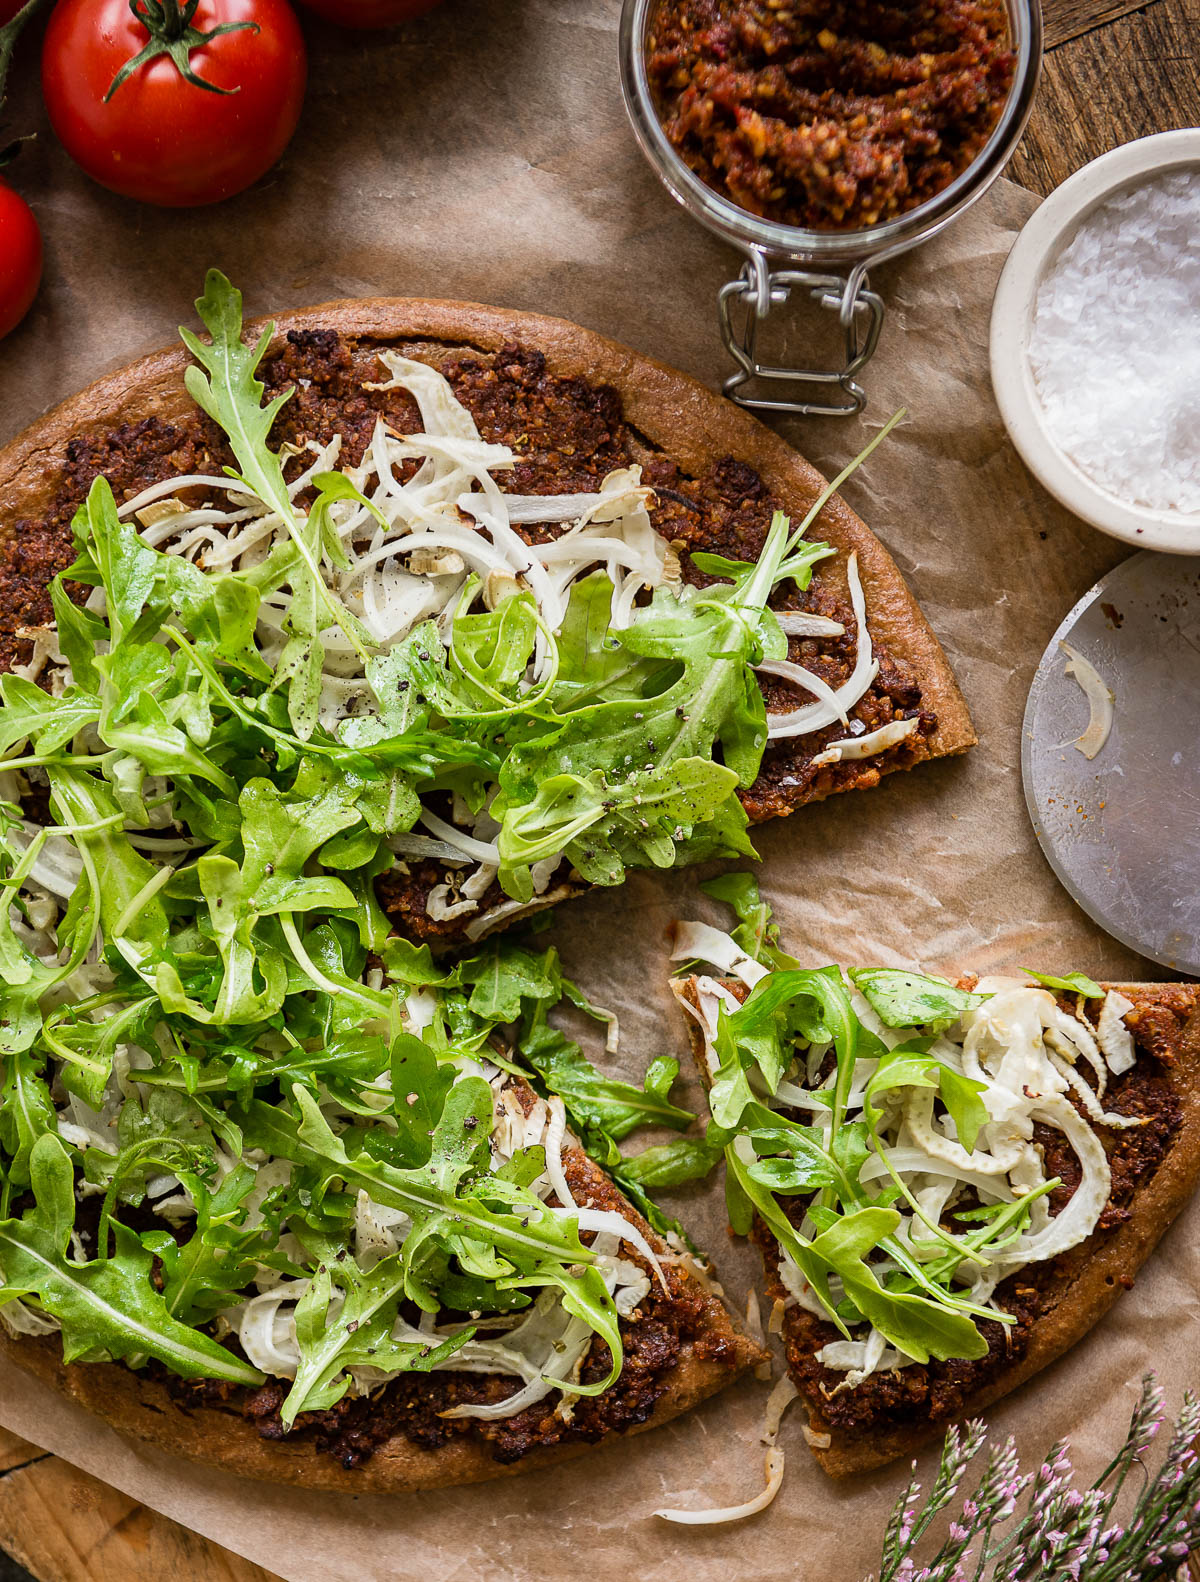 gluten free pizza sliced and topped with fennel and arugula on a parchment paper.